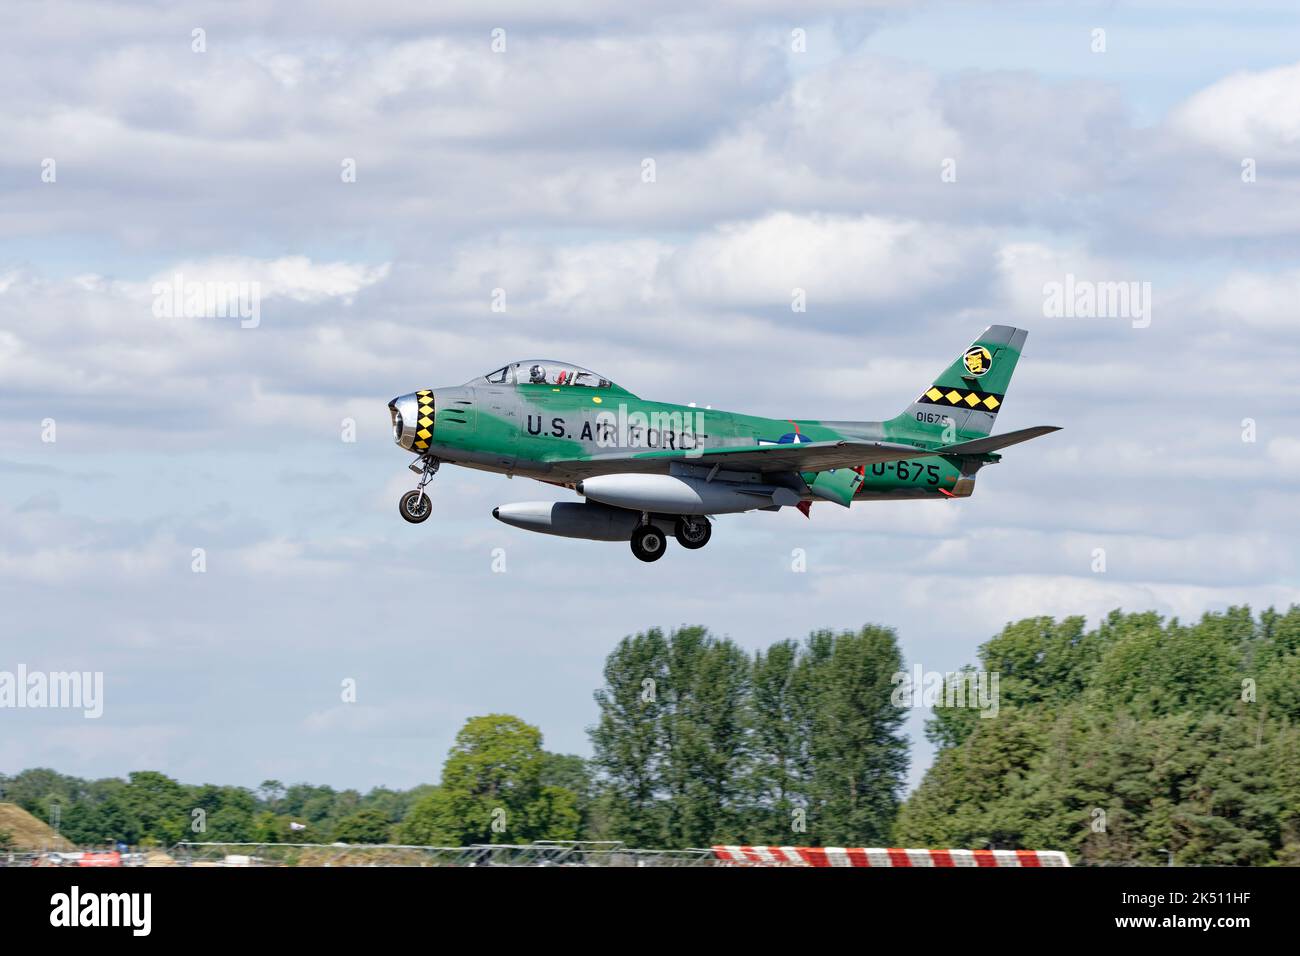 Mistral Aviation's Immaculate North American F-86 Sabre Heritage fighter jet arrivesat RAF Fairford in Gloucestershire Inghilterra per partecipare al RIAT Foto Stock